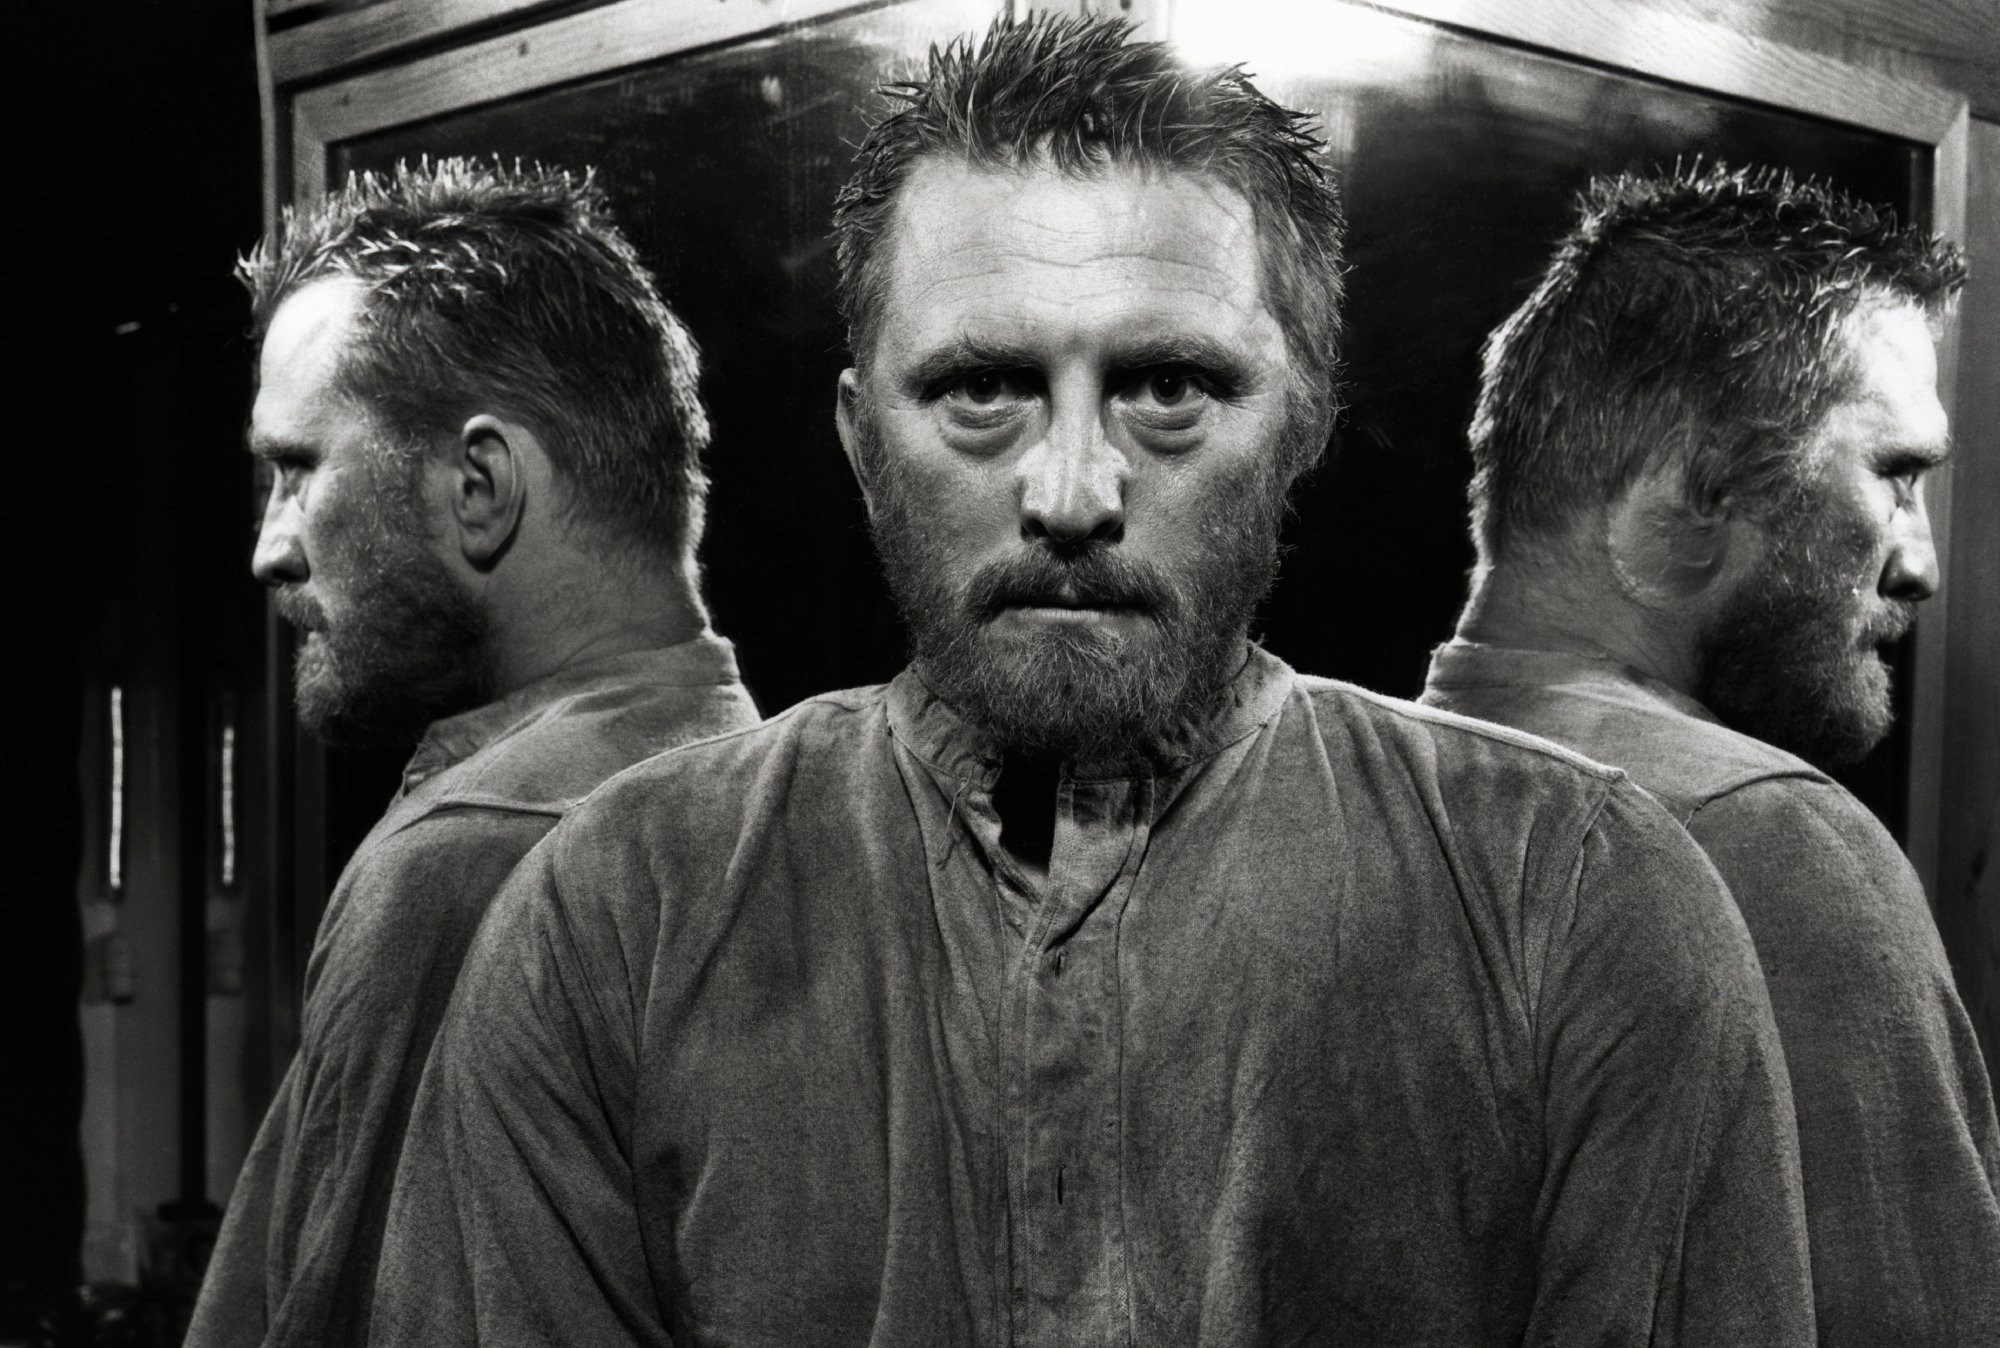 'Lust for Life' Kirk Douglas as Vincent van Gogh, which John Wayne 'berated' him for. Black-and-white image of Douglas looking into the camera with mirrored images of himself on either side.